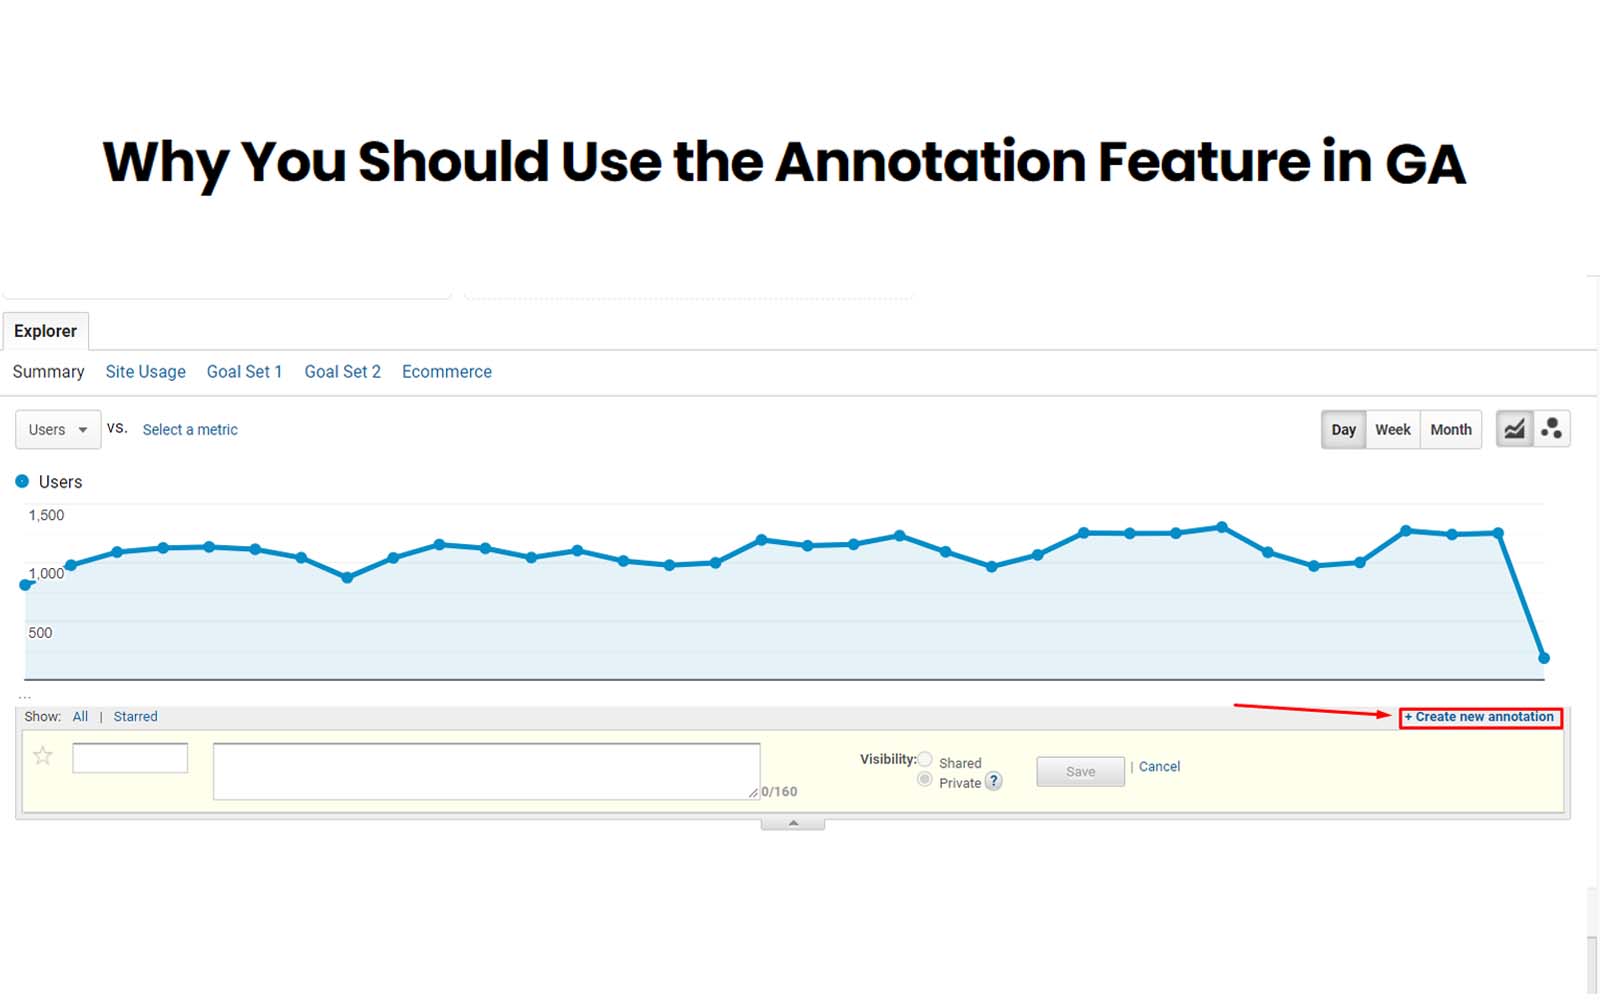 Why You Should Use the Annotation Feature in GA